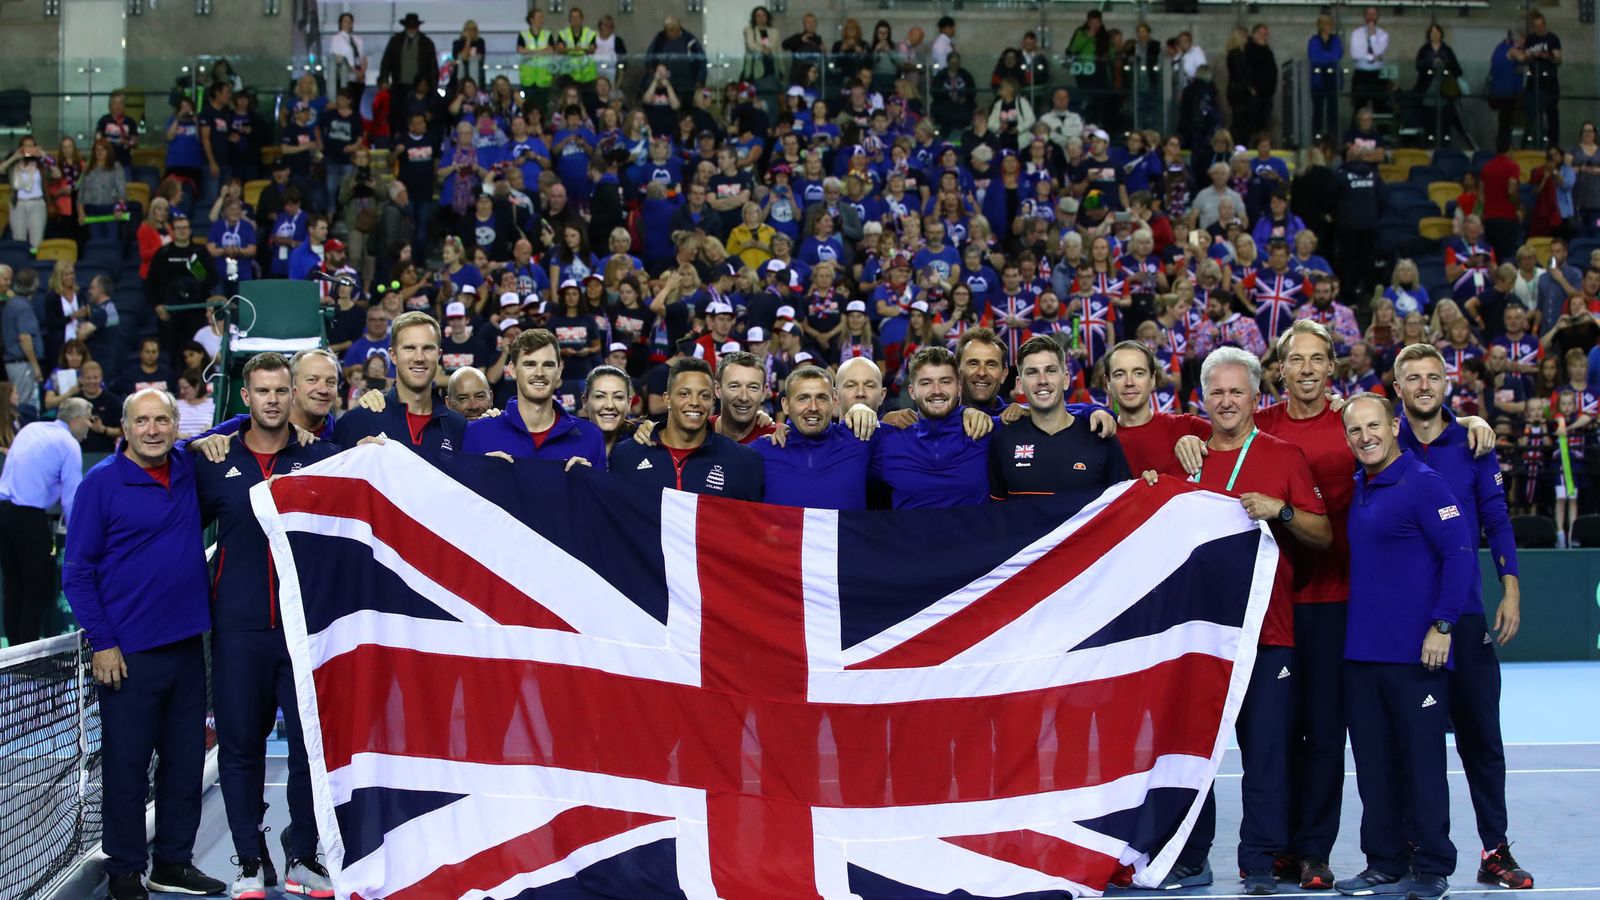 Great Britain among the 12 seeded nations for Davis Cup in 2019